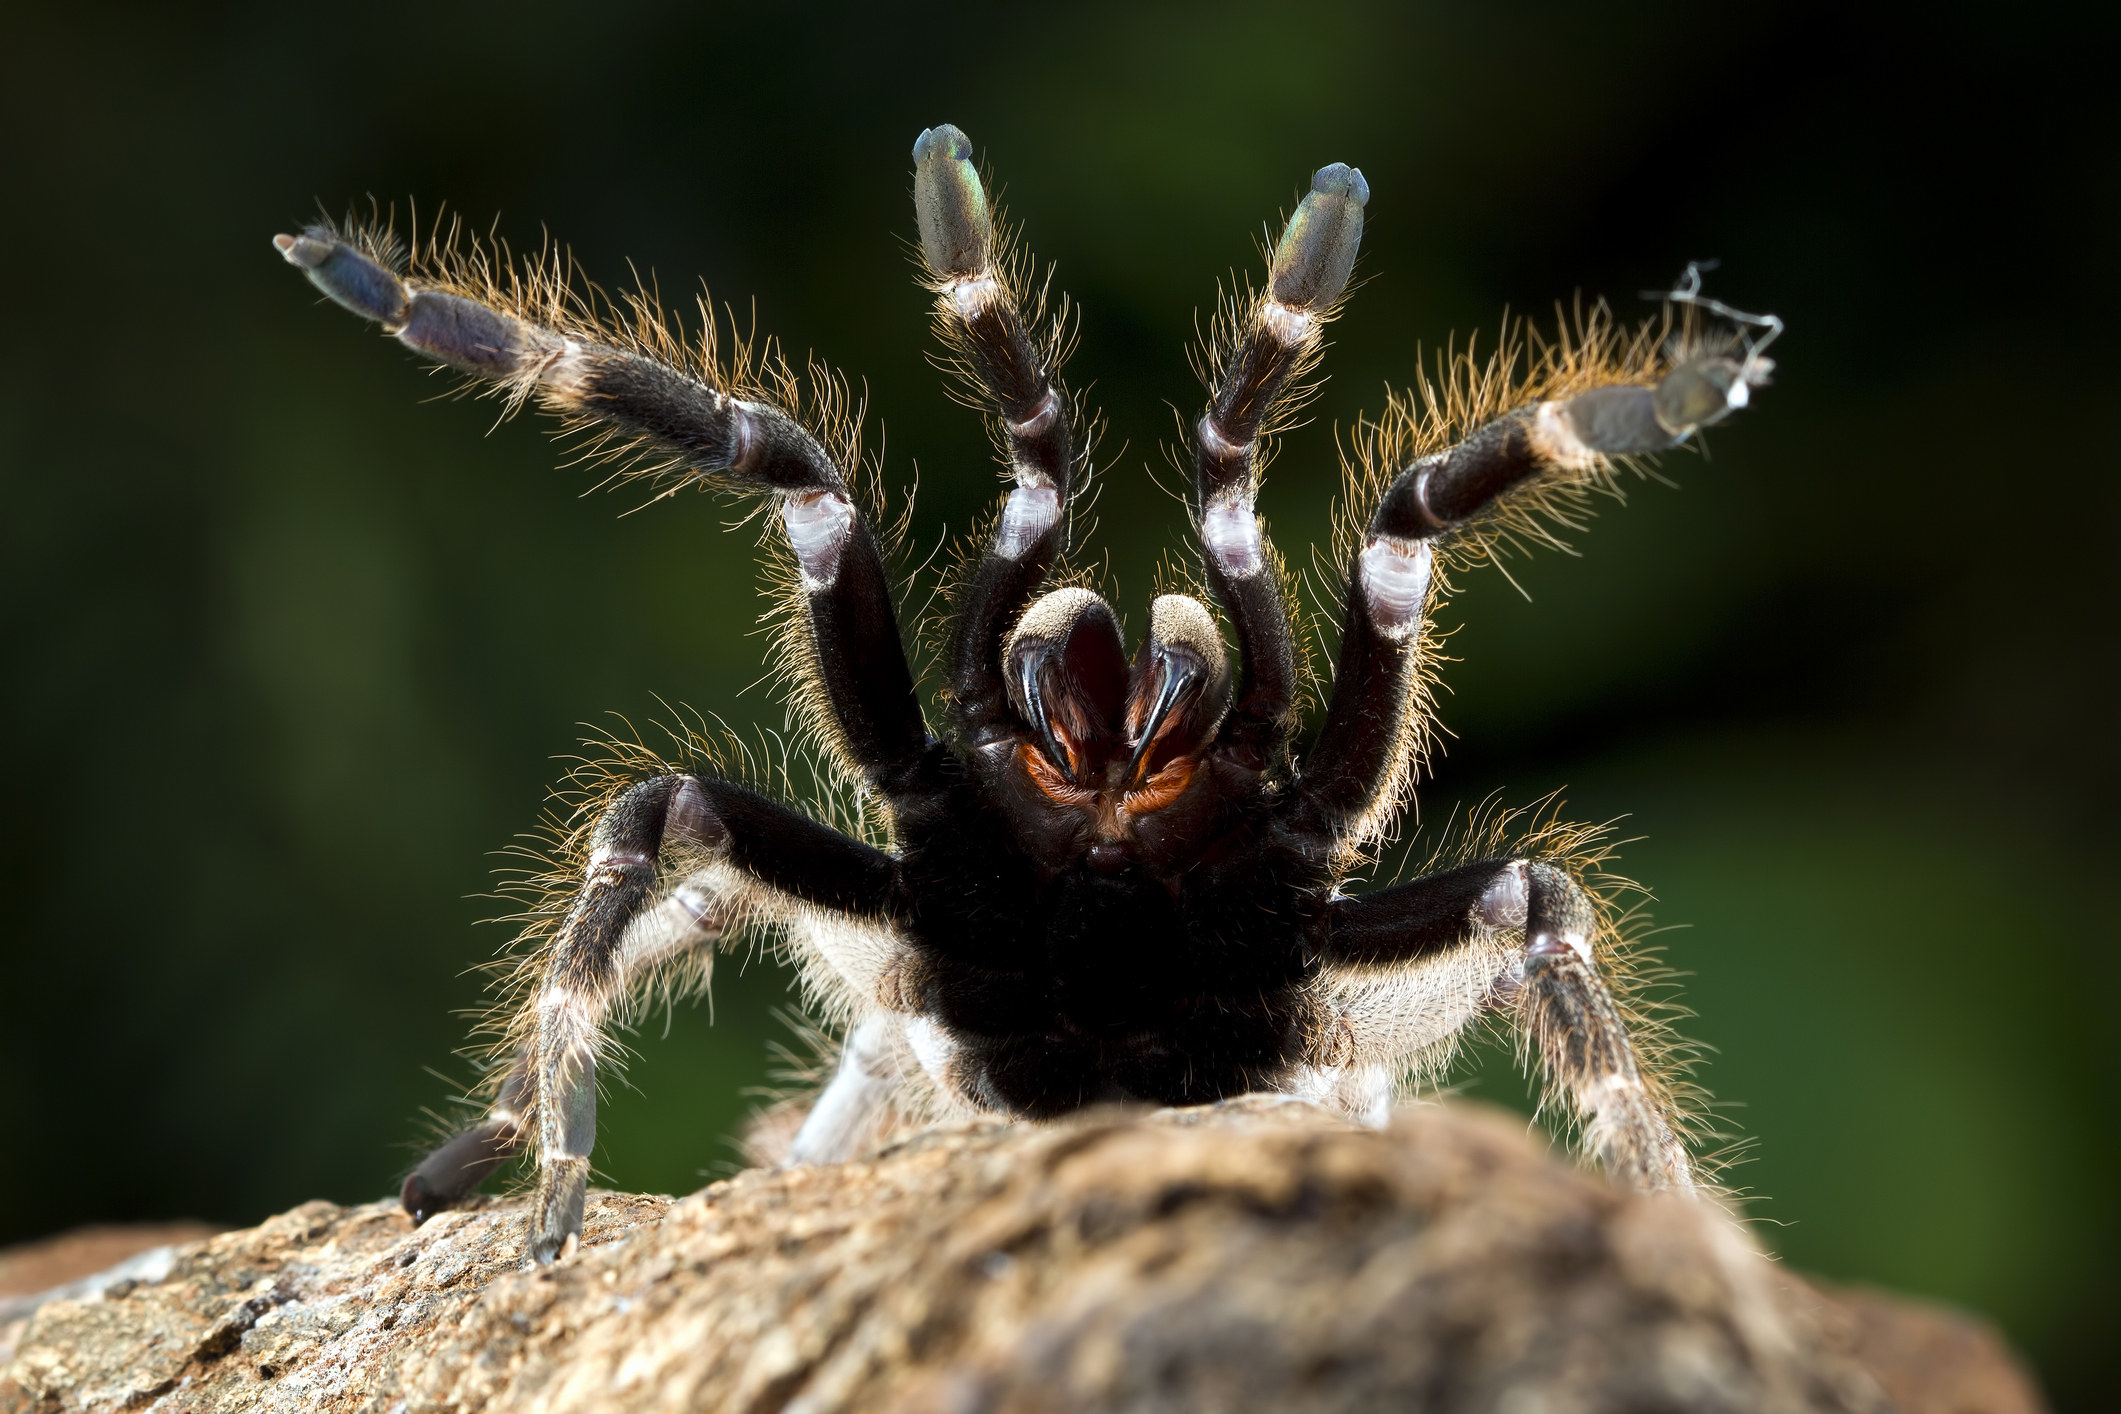 A tarantula holding up its front four legs and facing the camera